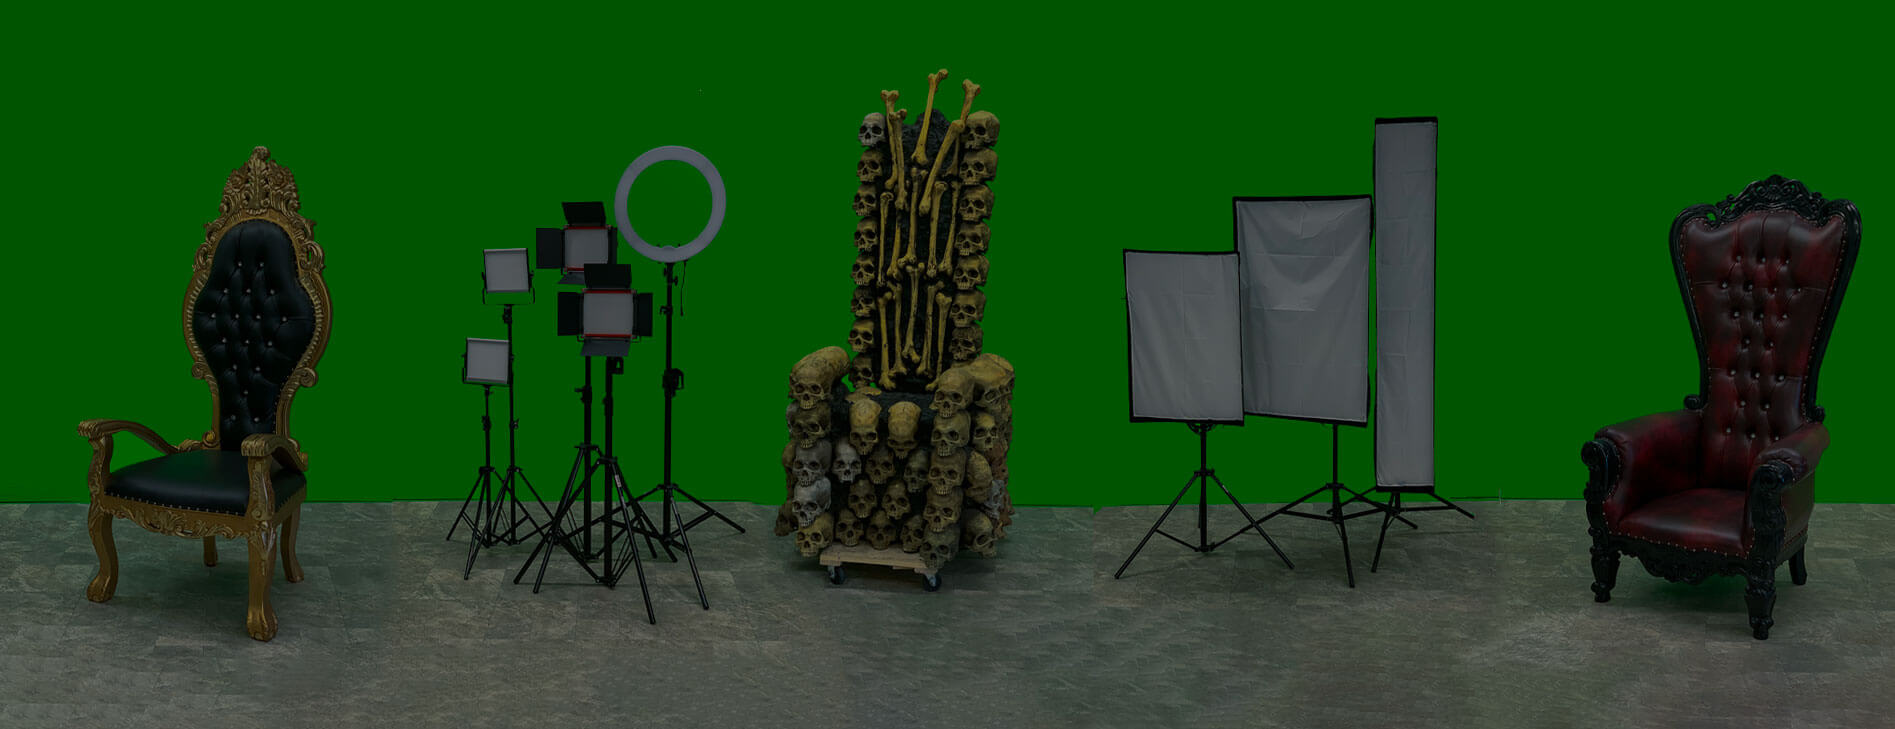 Gallery of studio sets, equipment and props